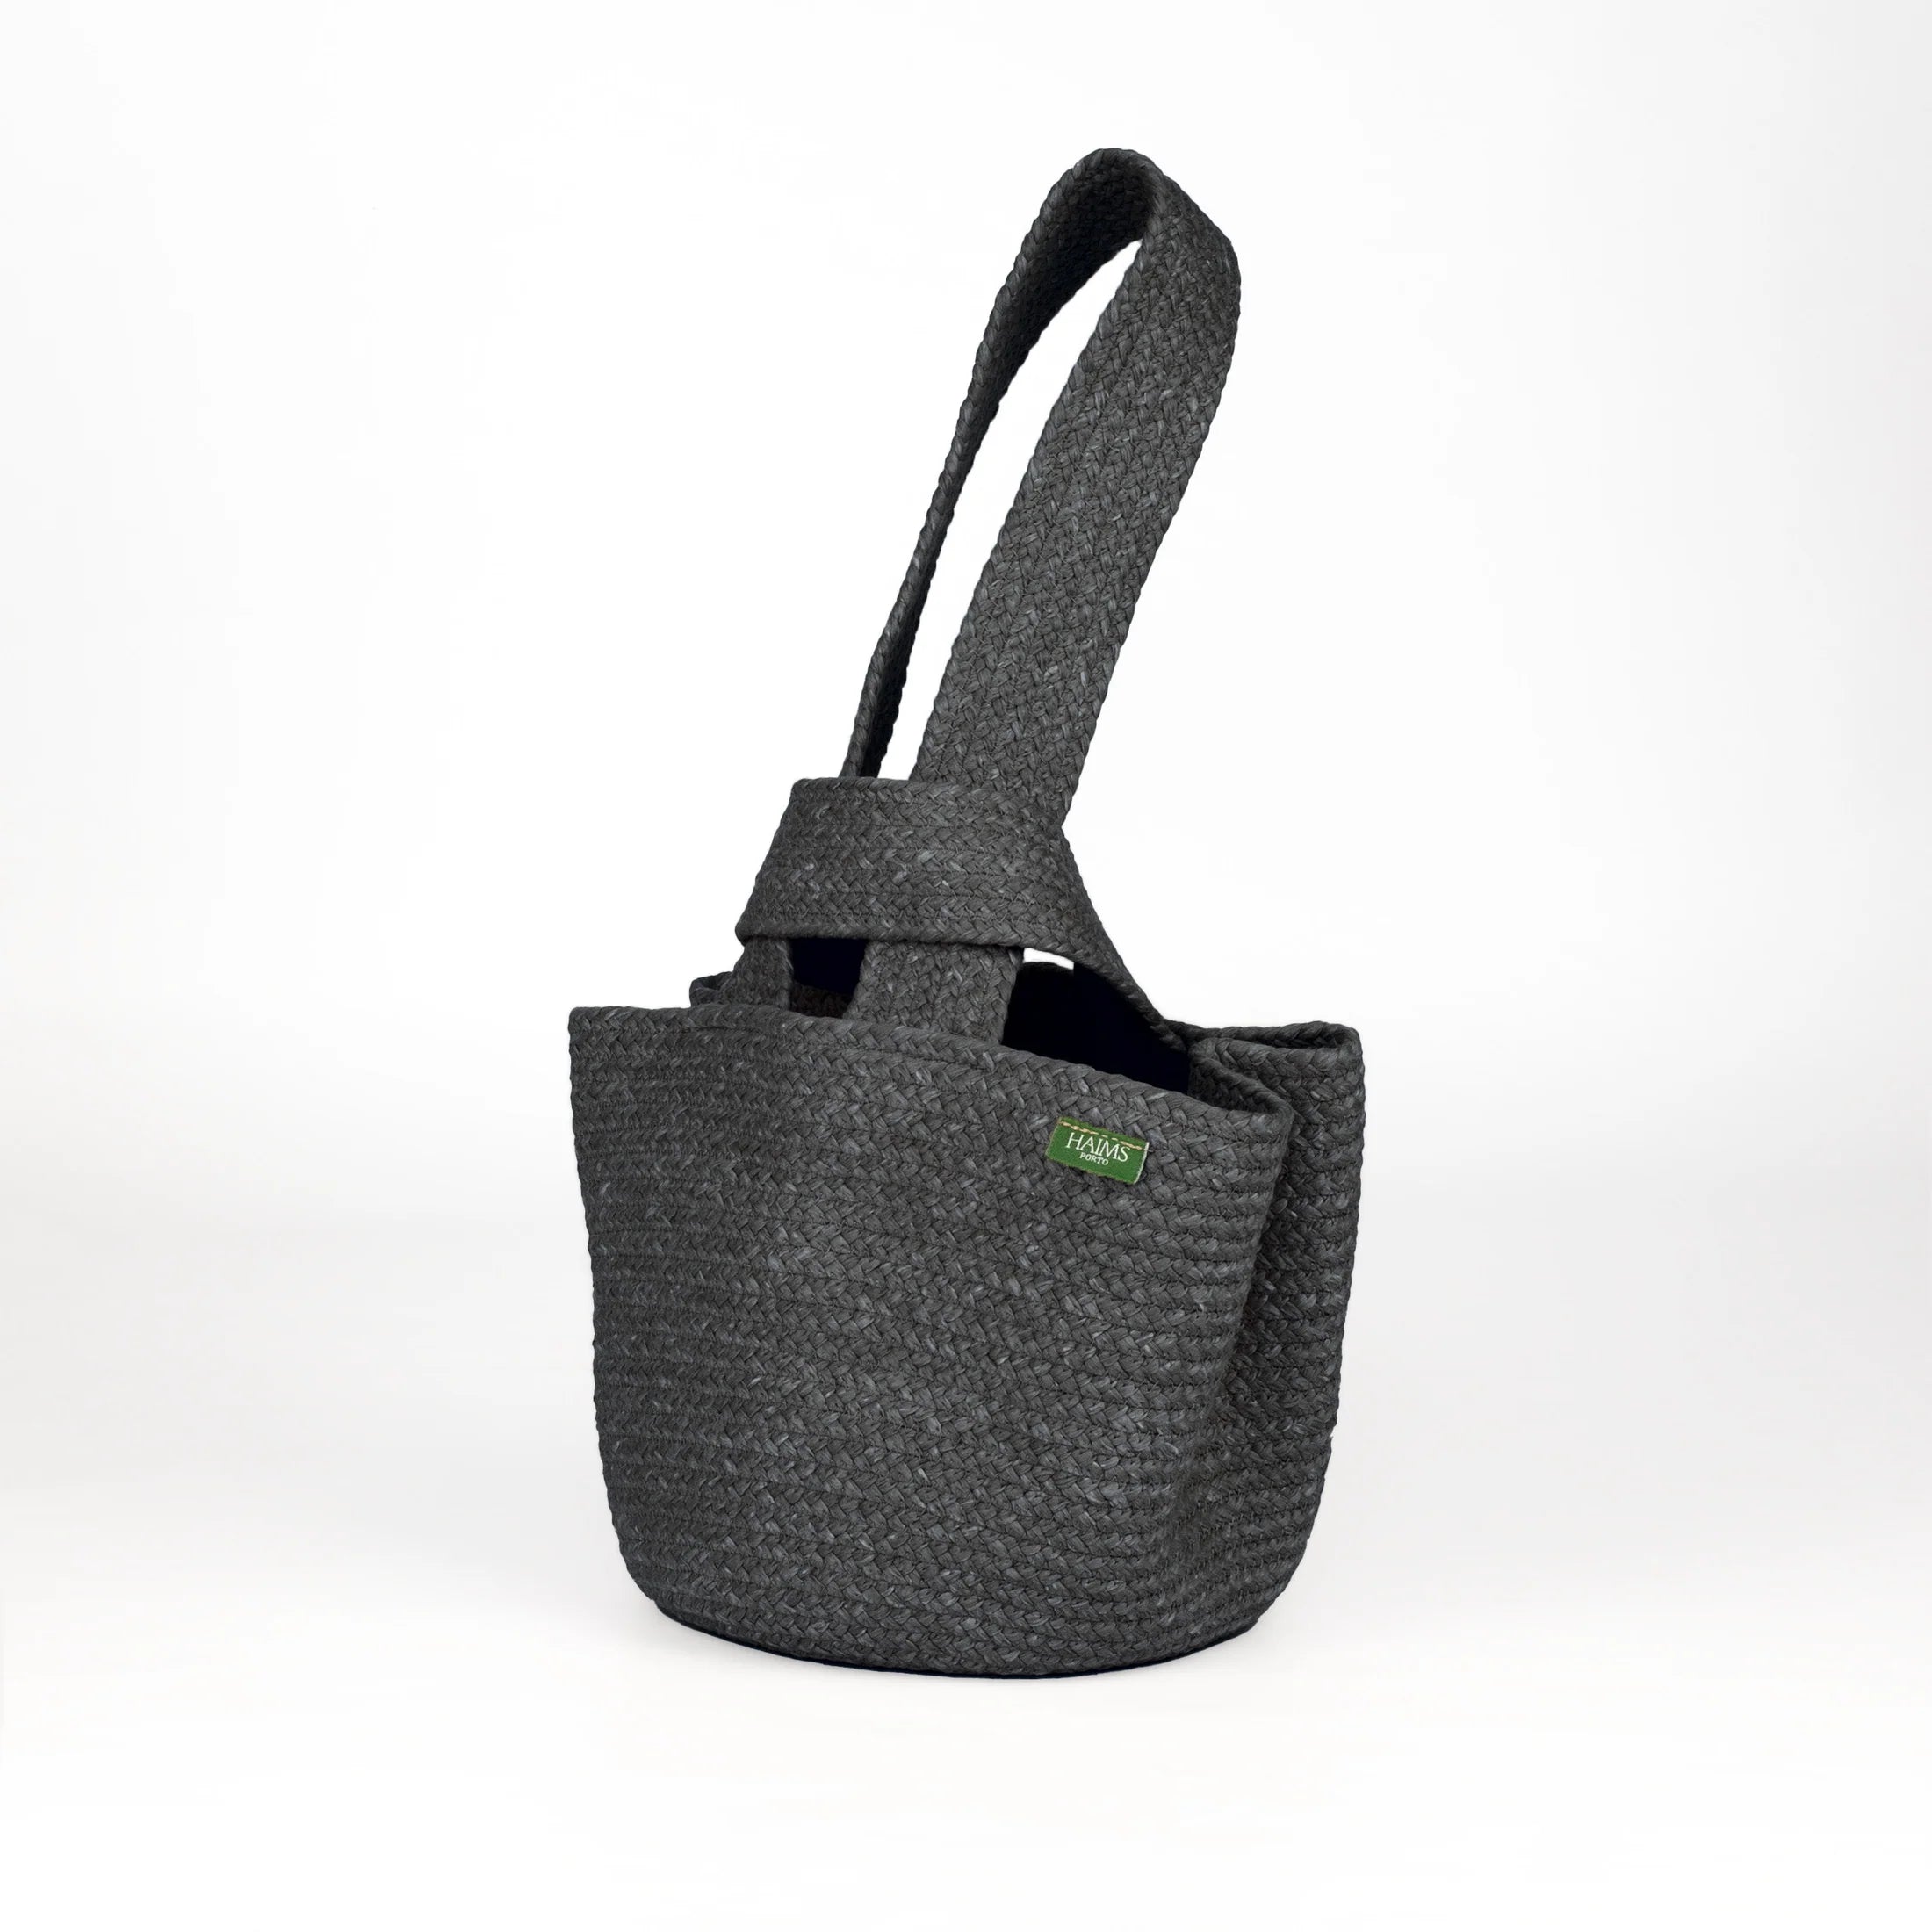 Alma Sustainable Small Handbag in Anthracite